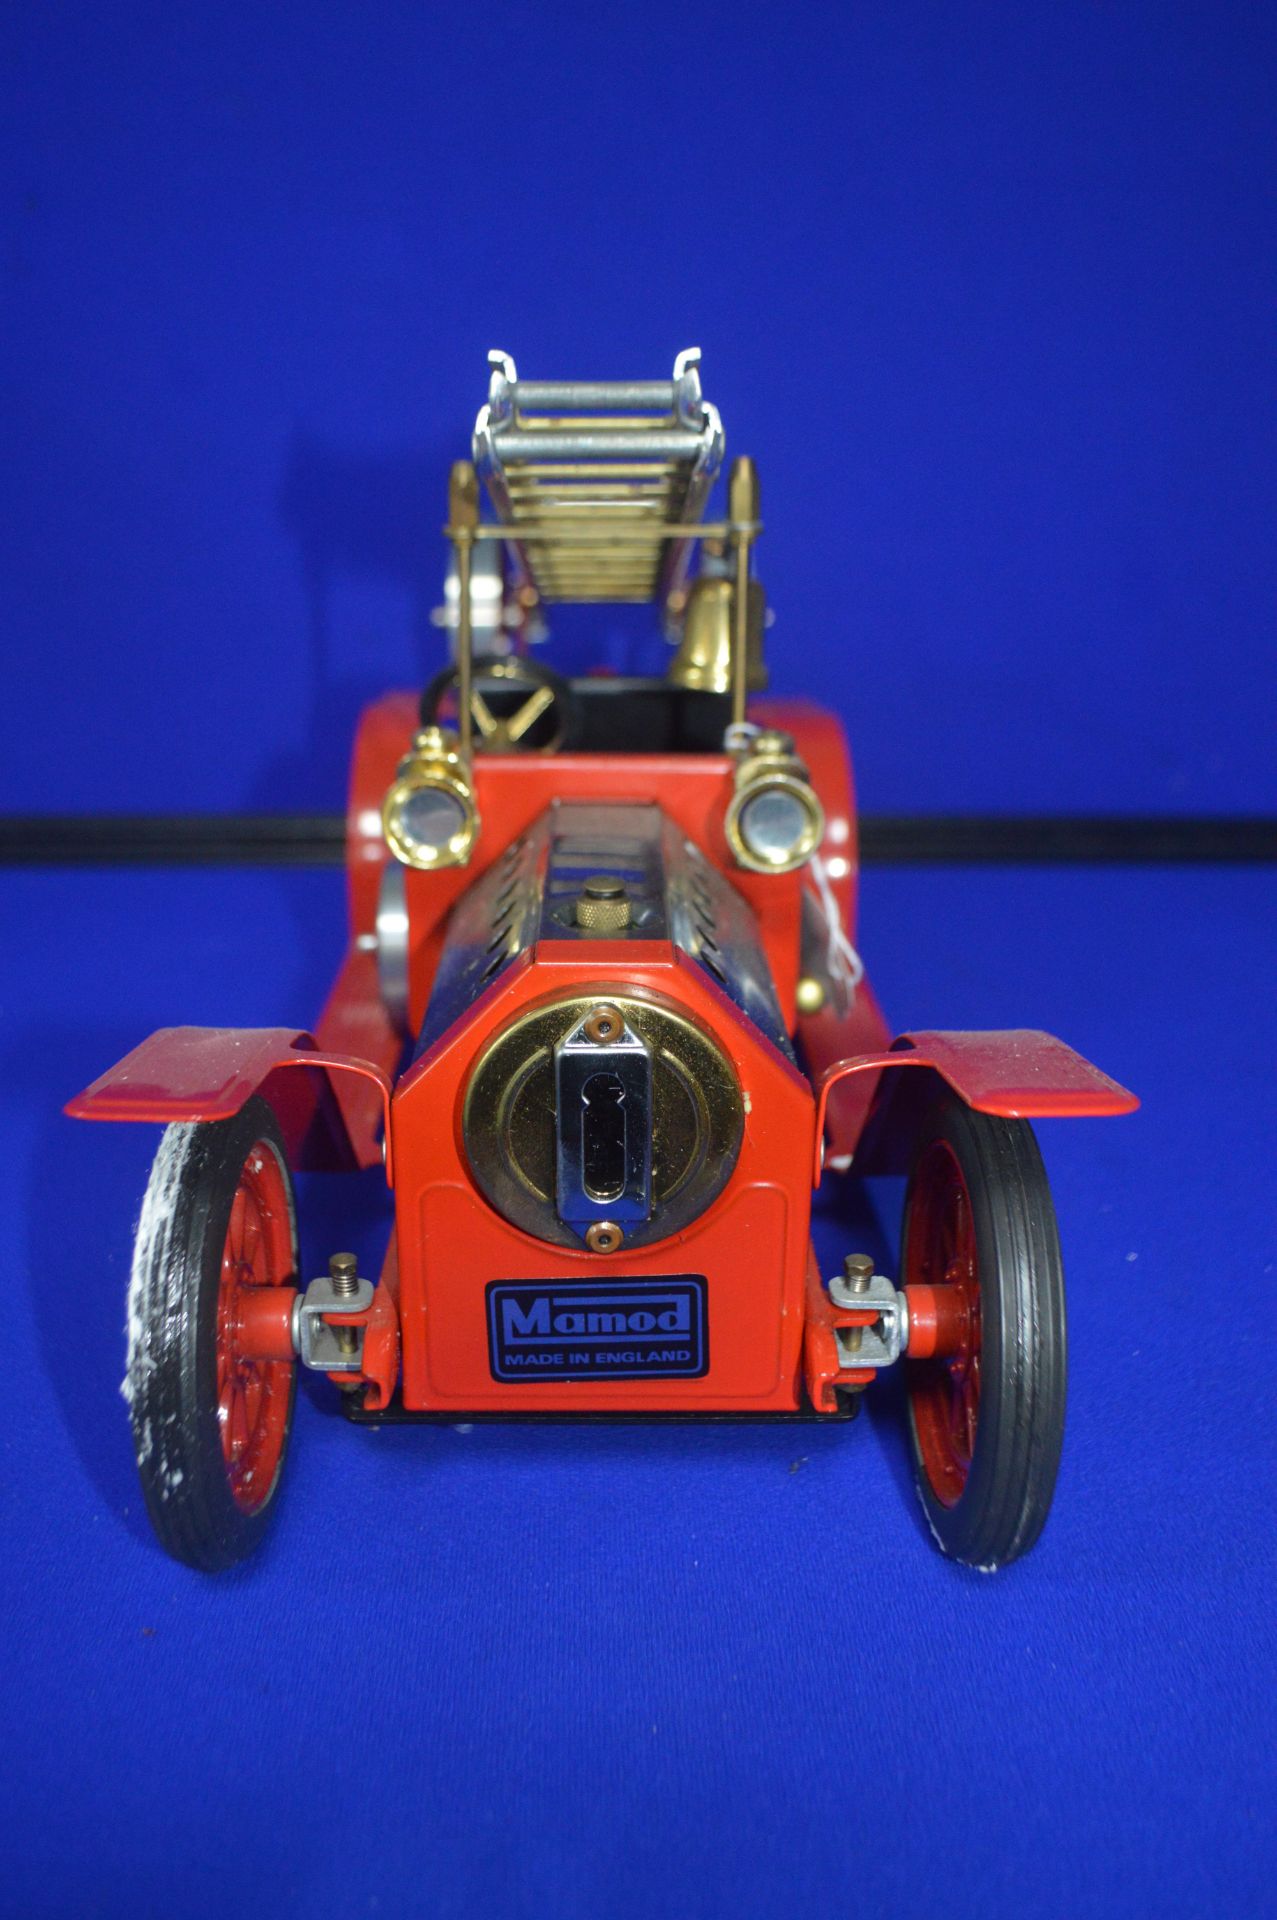 Mamod Live Steam Fire Engine with Packaging - Image 3 of 5